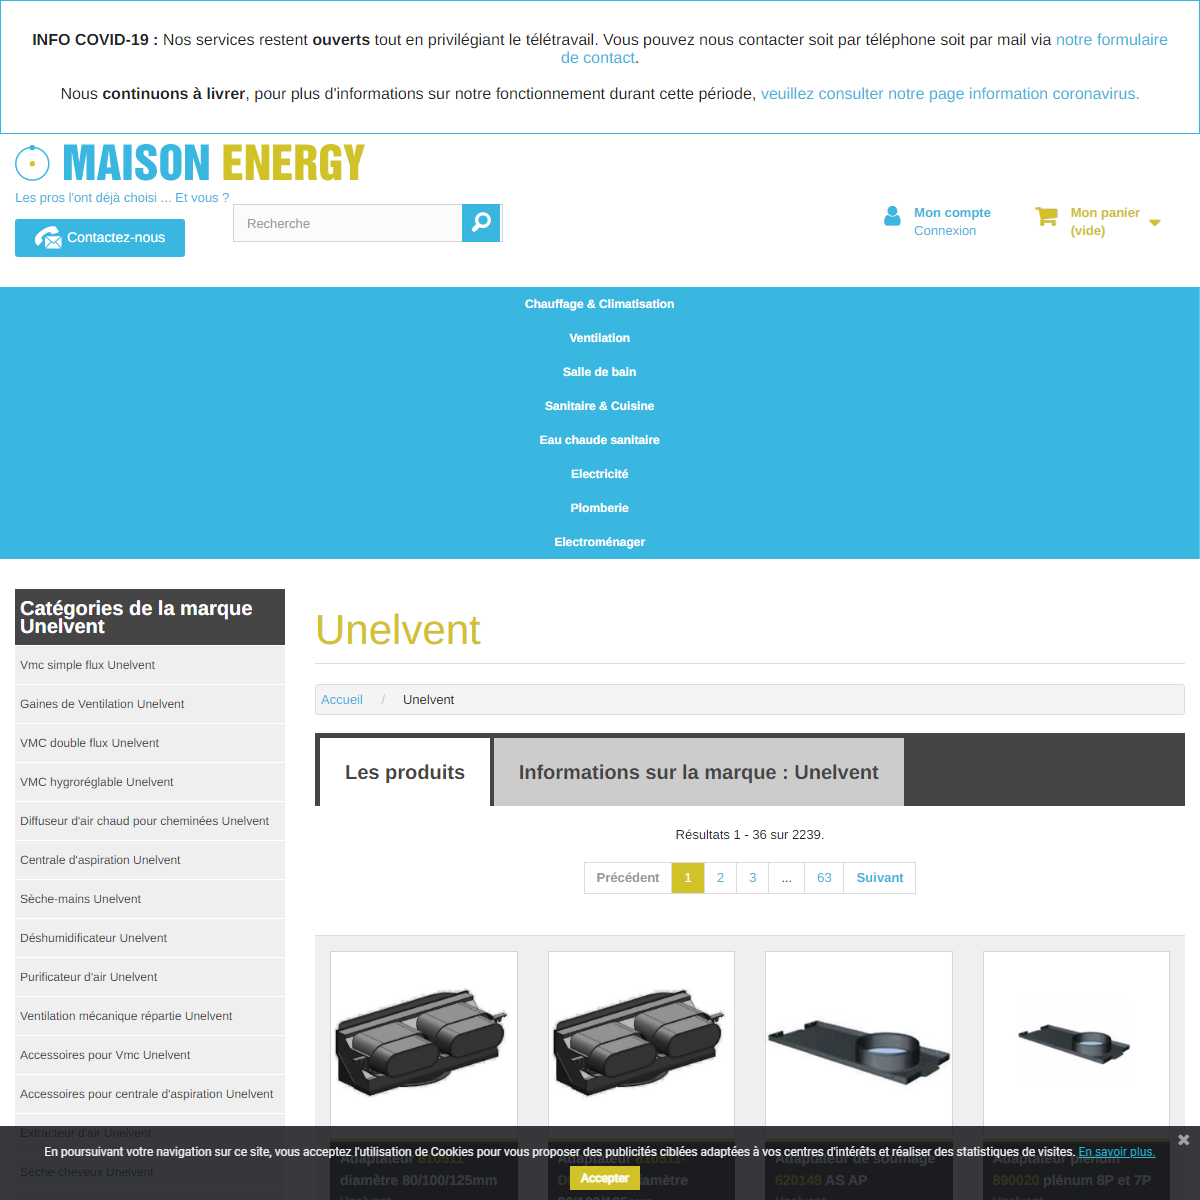 A complete backup of https://www.maison-energy.com/unelvent-M13/